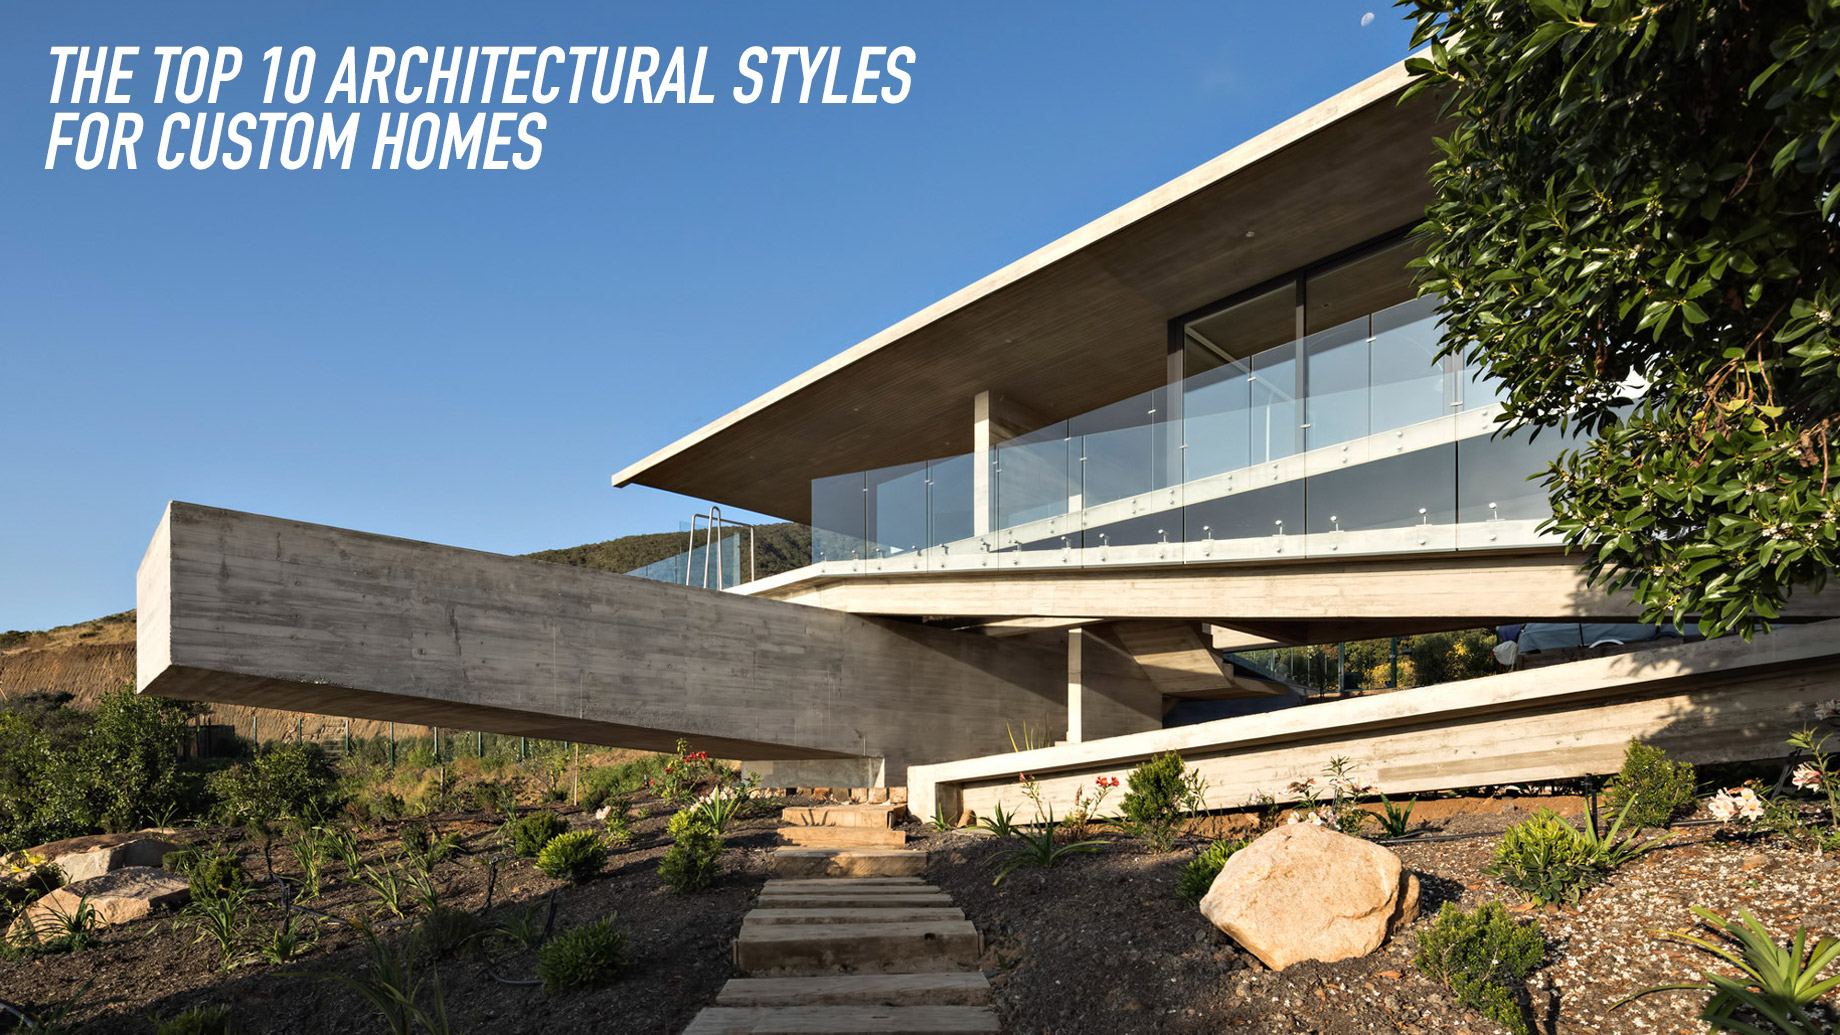 The Top 10 Architectural Styles for Custom Homes in 2021